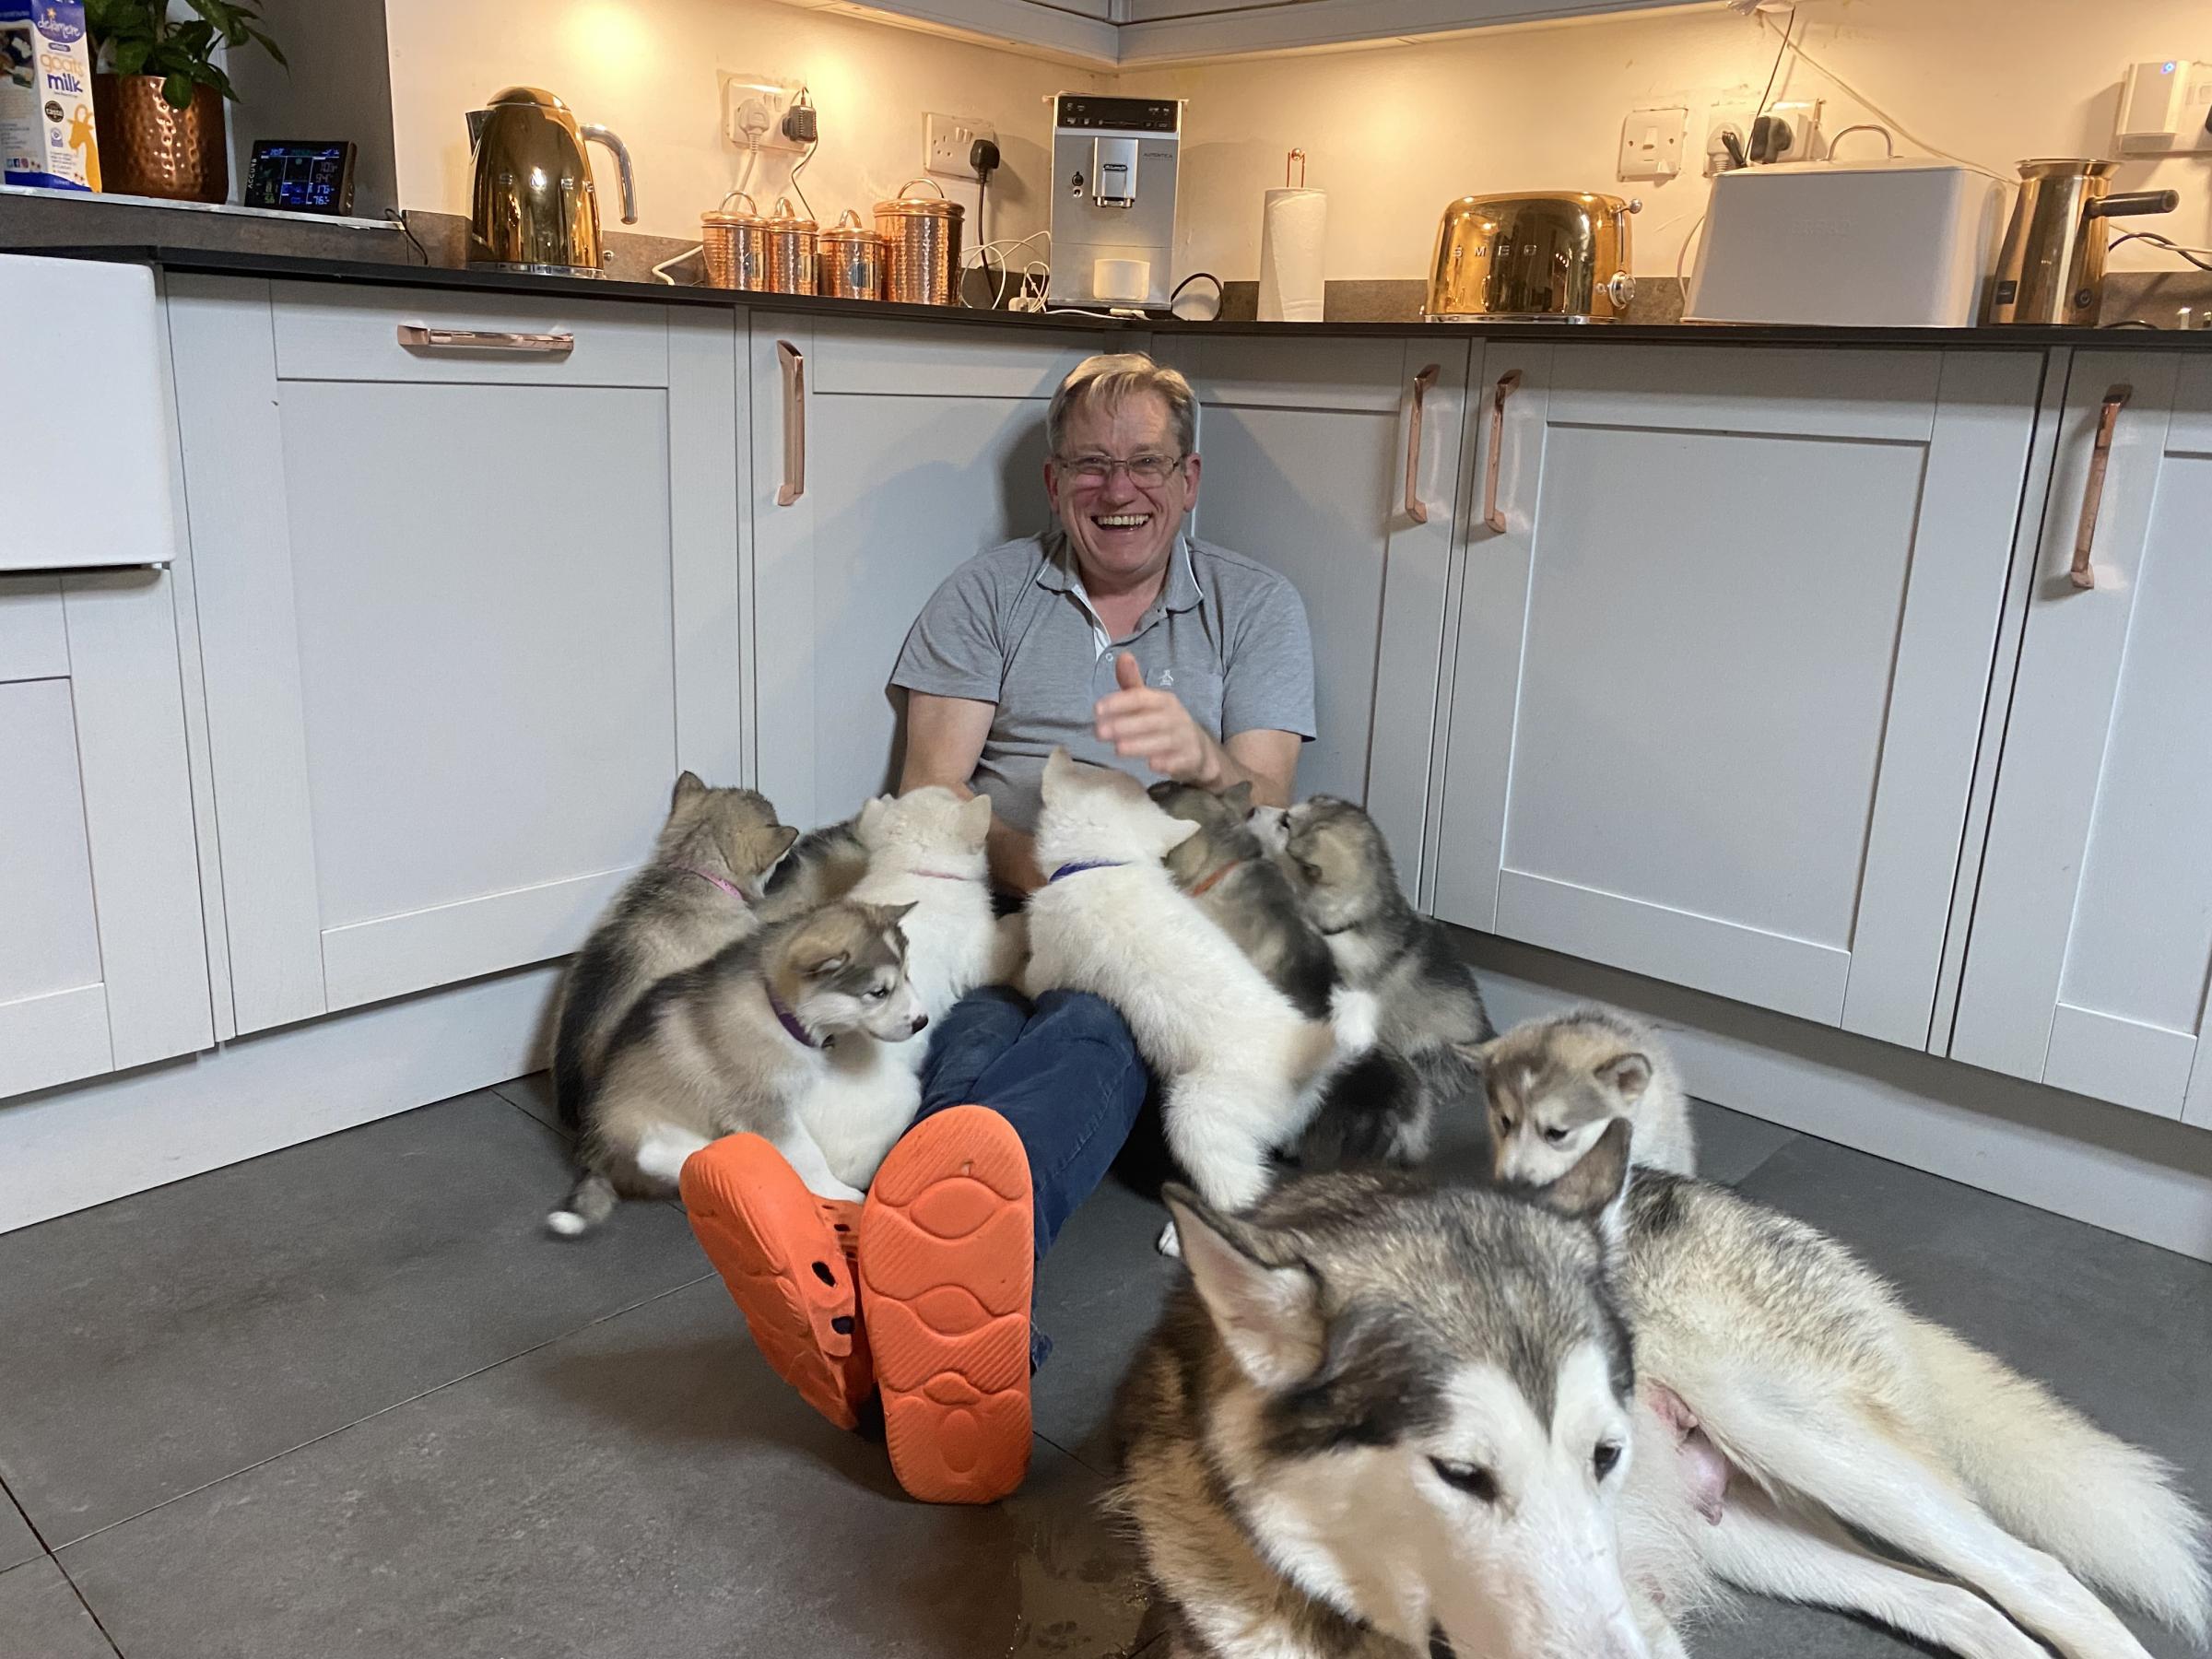 Steven Pooley with some of the puppies. Image: SWNS